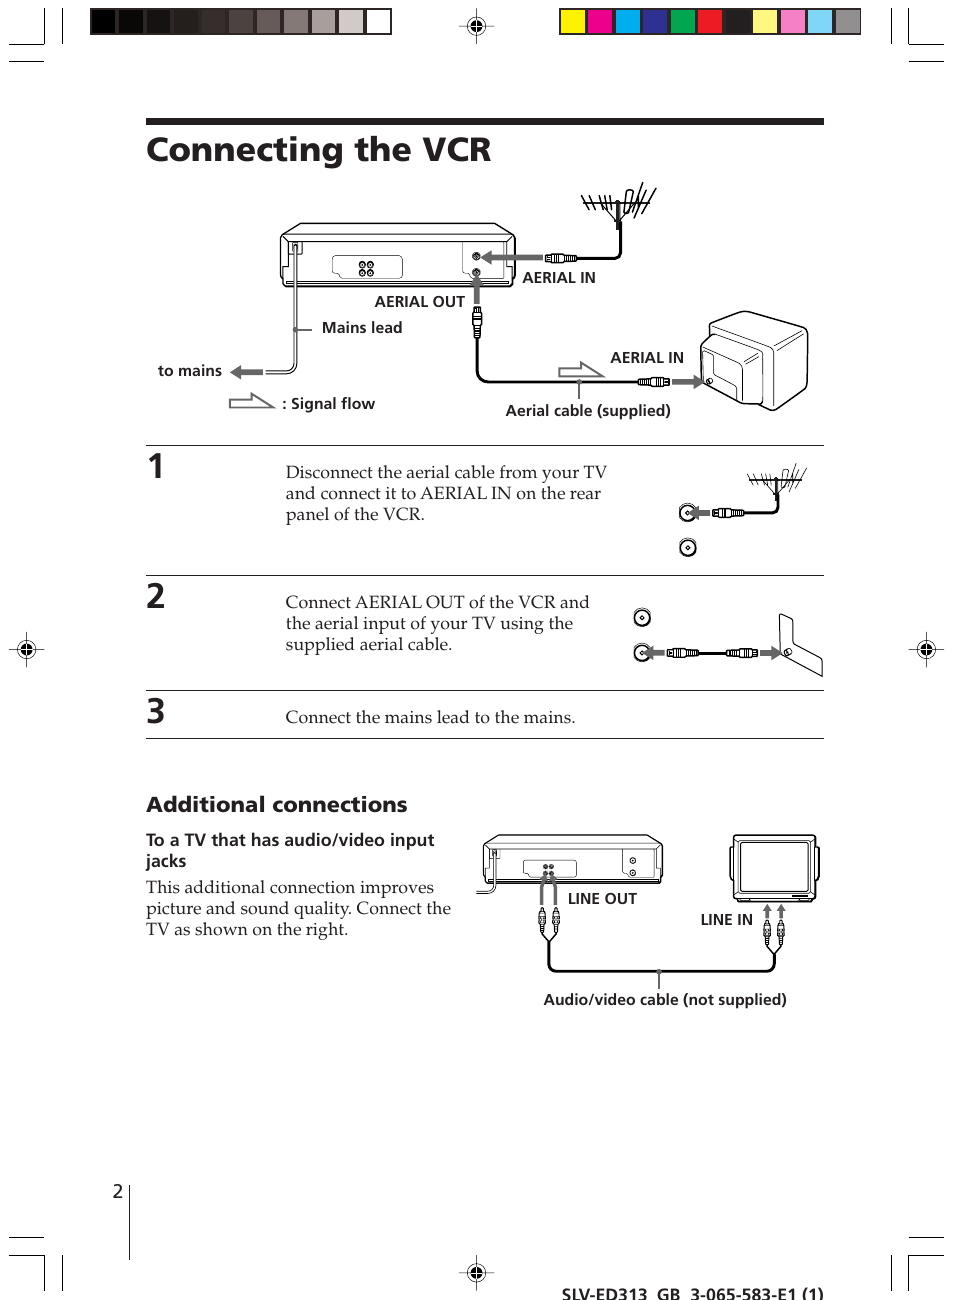 Connecting the vcr, Additional connections | Sony SLV-ED313 User Manual | Page 2 / 20